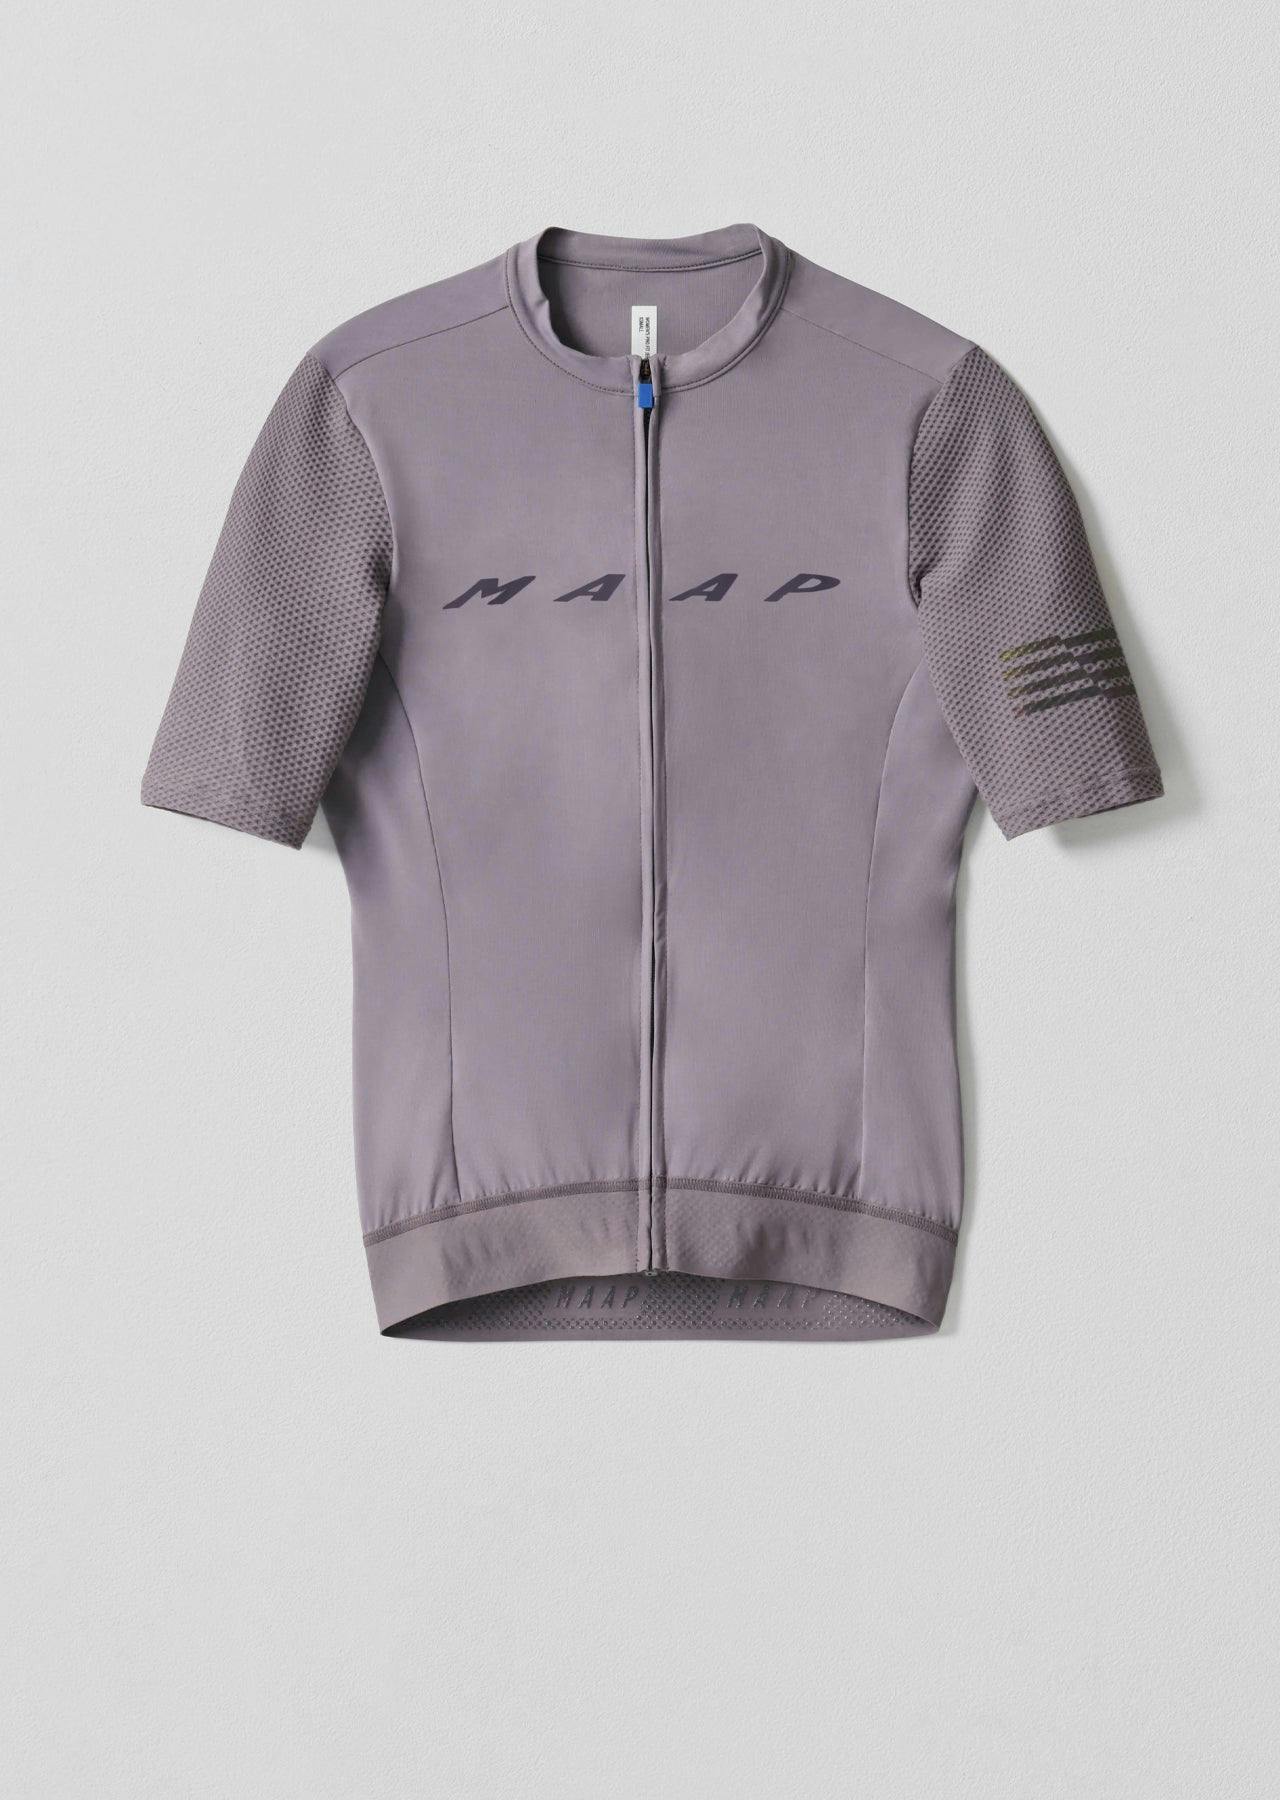 Our Latest Cycling Collections | For Women | MAAP